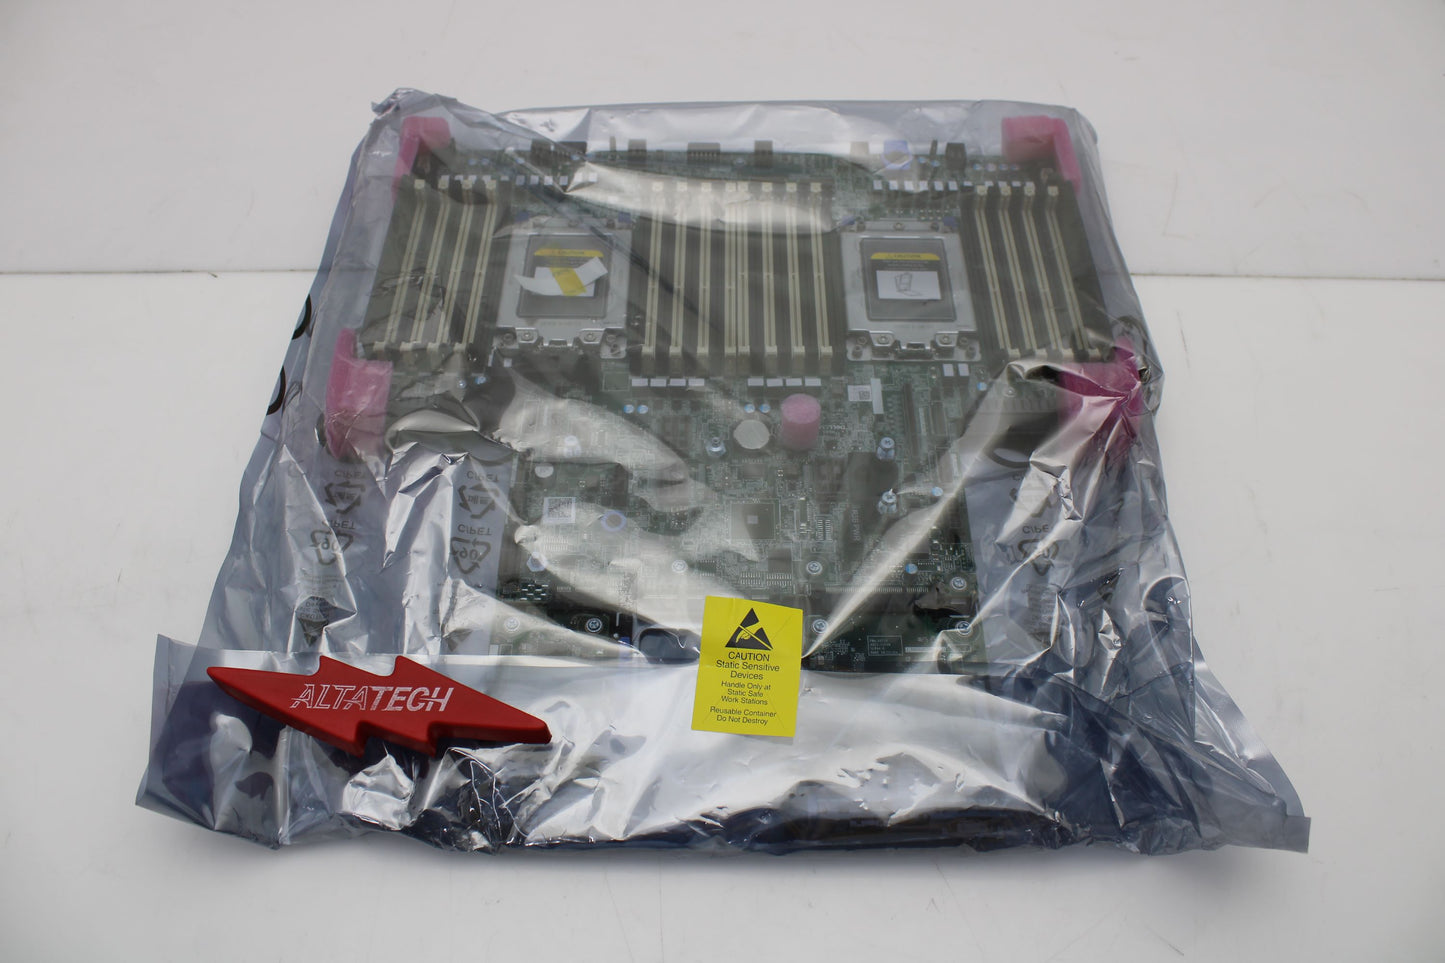 Dell PYVT1_NEW System Board, R7525, New Sealed